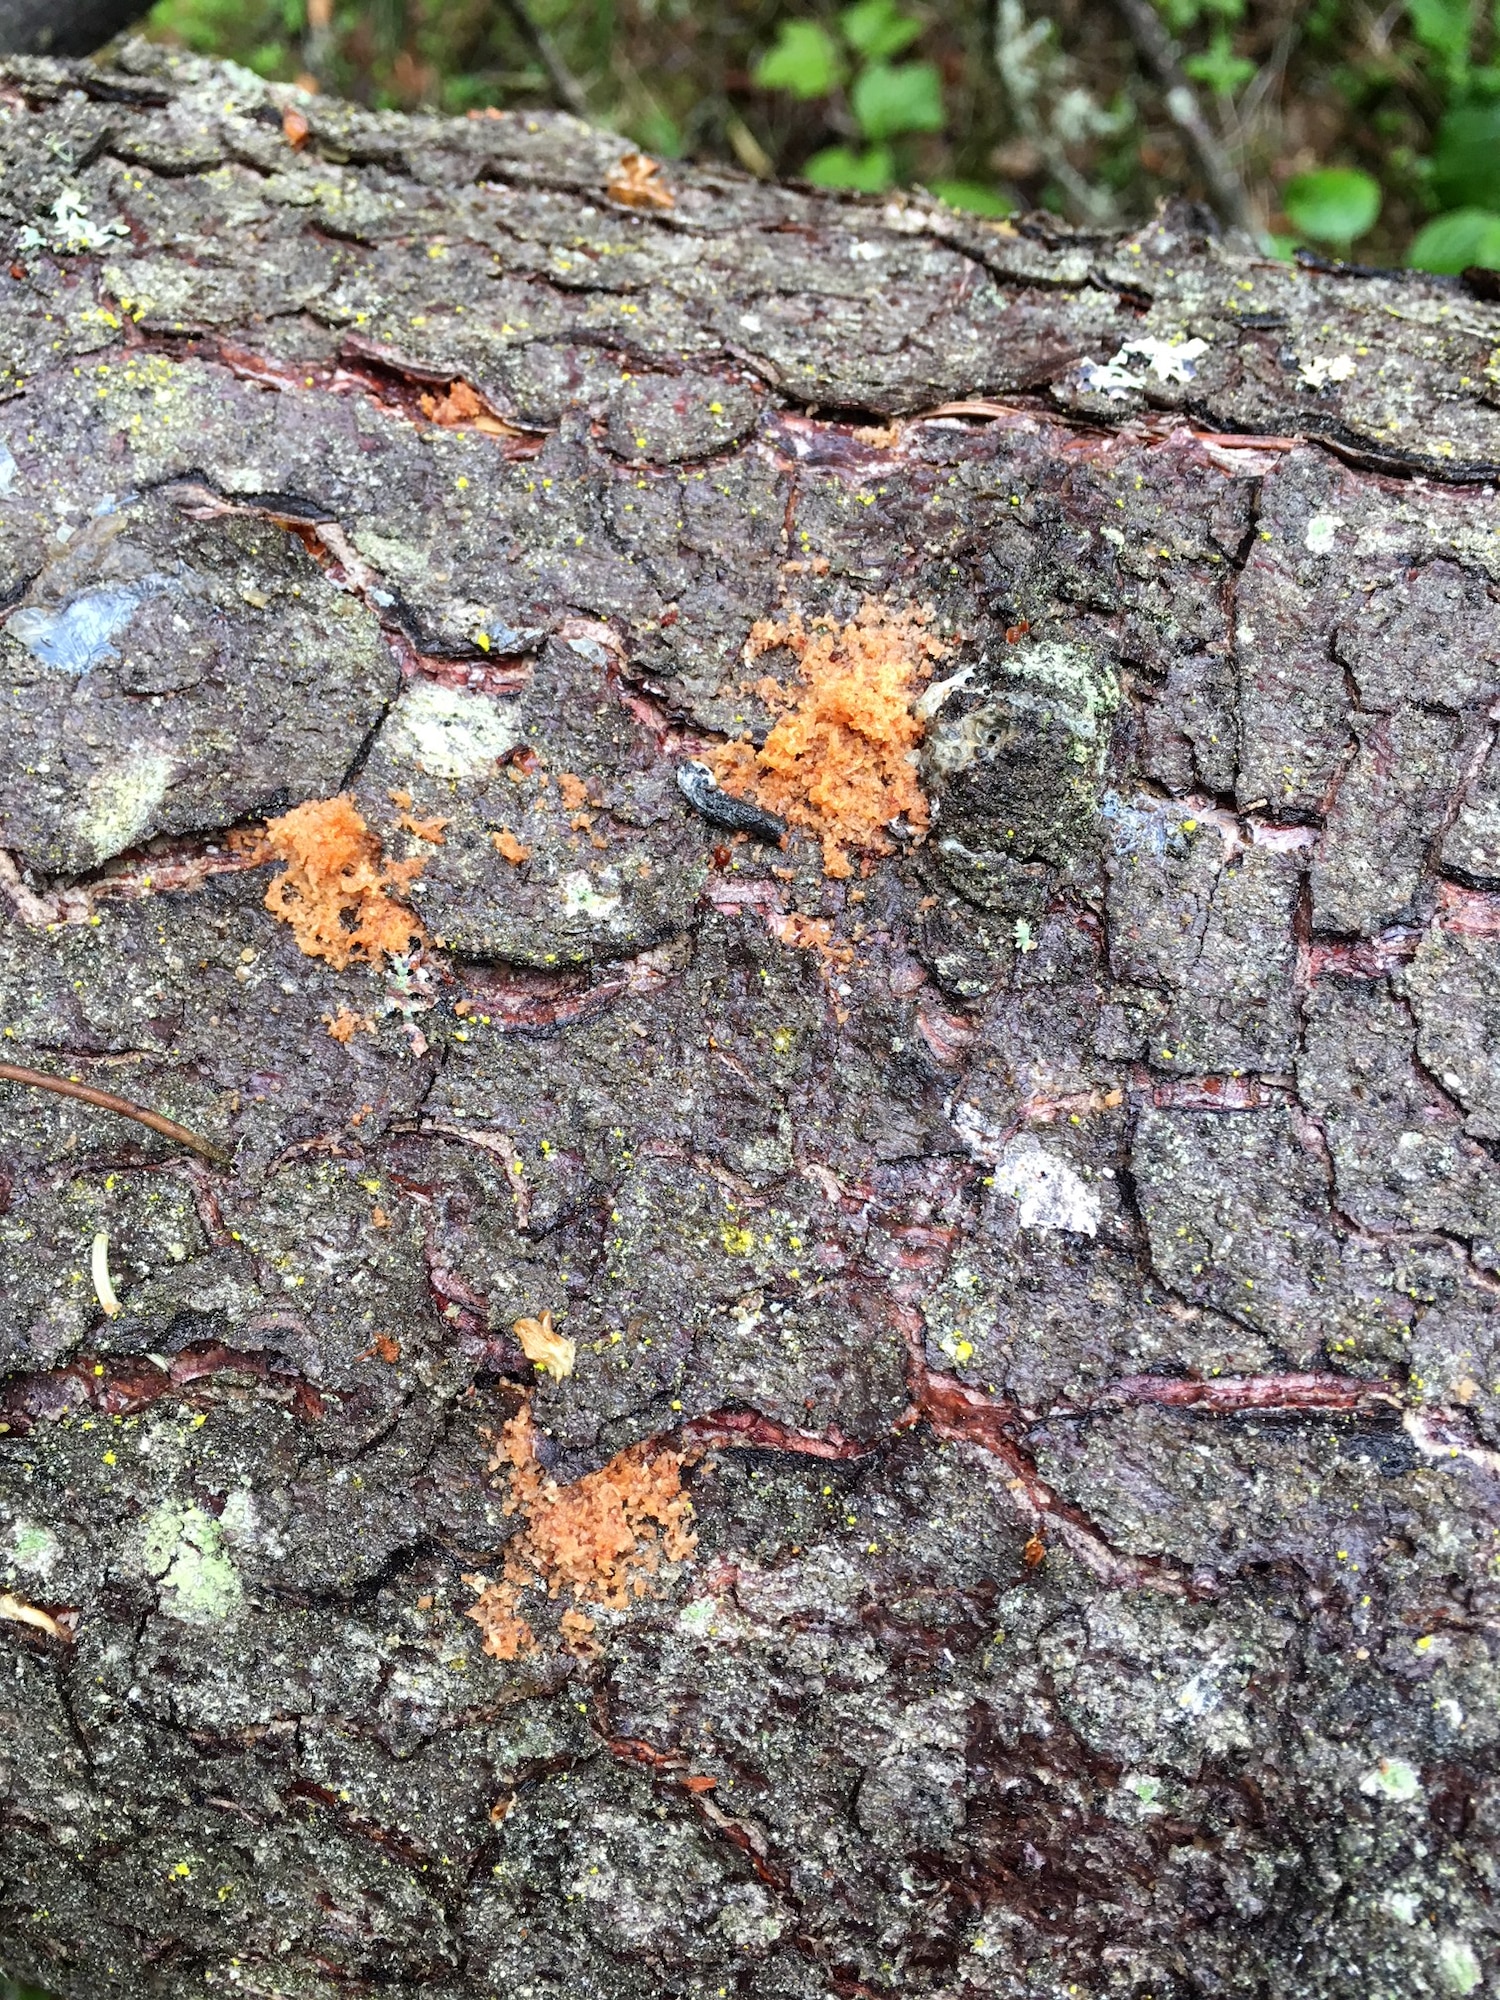 Spruce bark beetle dung, called frass, or “sawdust,” marks where a spruce bark beetle has burrowed under the bark of a spruce tree at Joint Base Elmendorf-Richardson, Alaska, June 6, 2018. Spruce bark beetles are attacking Alaska’s spruce tree population from the Kenai Peninsula to the Matanuska Valley and JBER. In the past 35 years, spruce beetle outbreaks have resulted in the loss of an estimated three billion board feet of timber in Alaska.